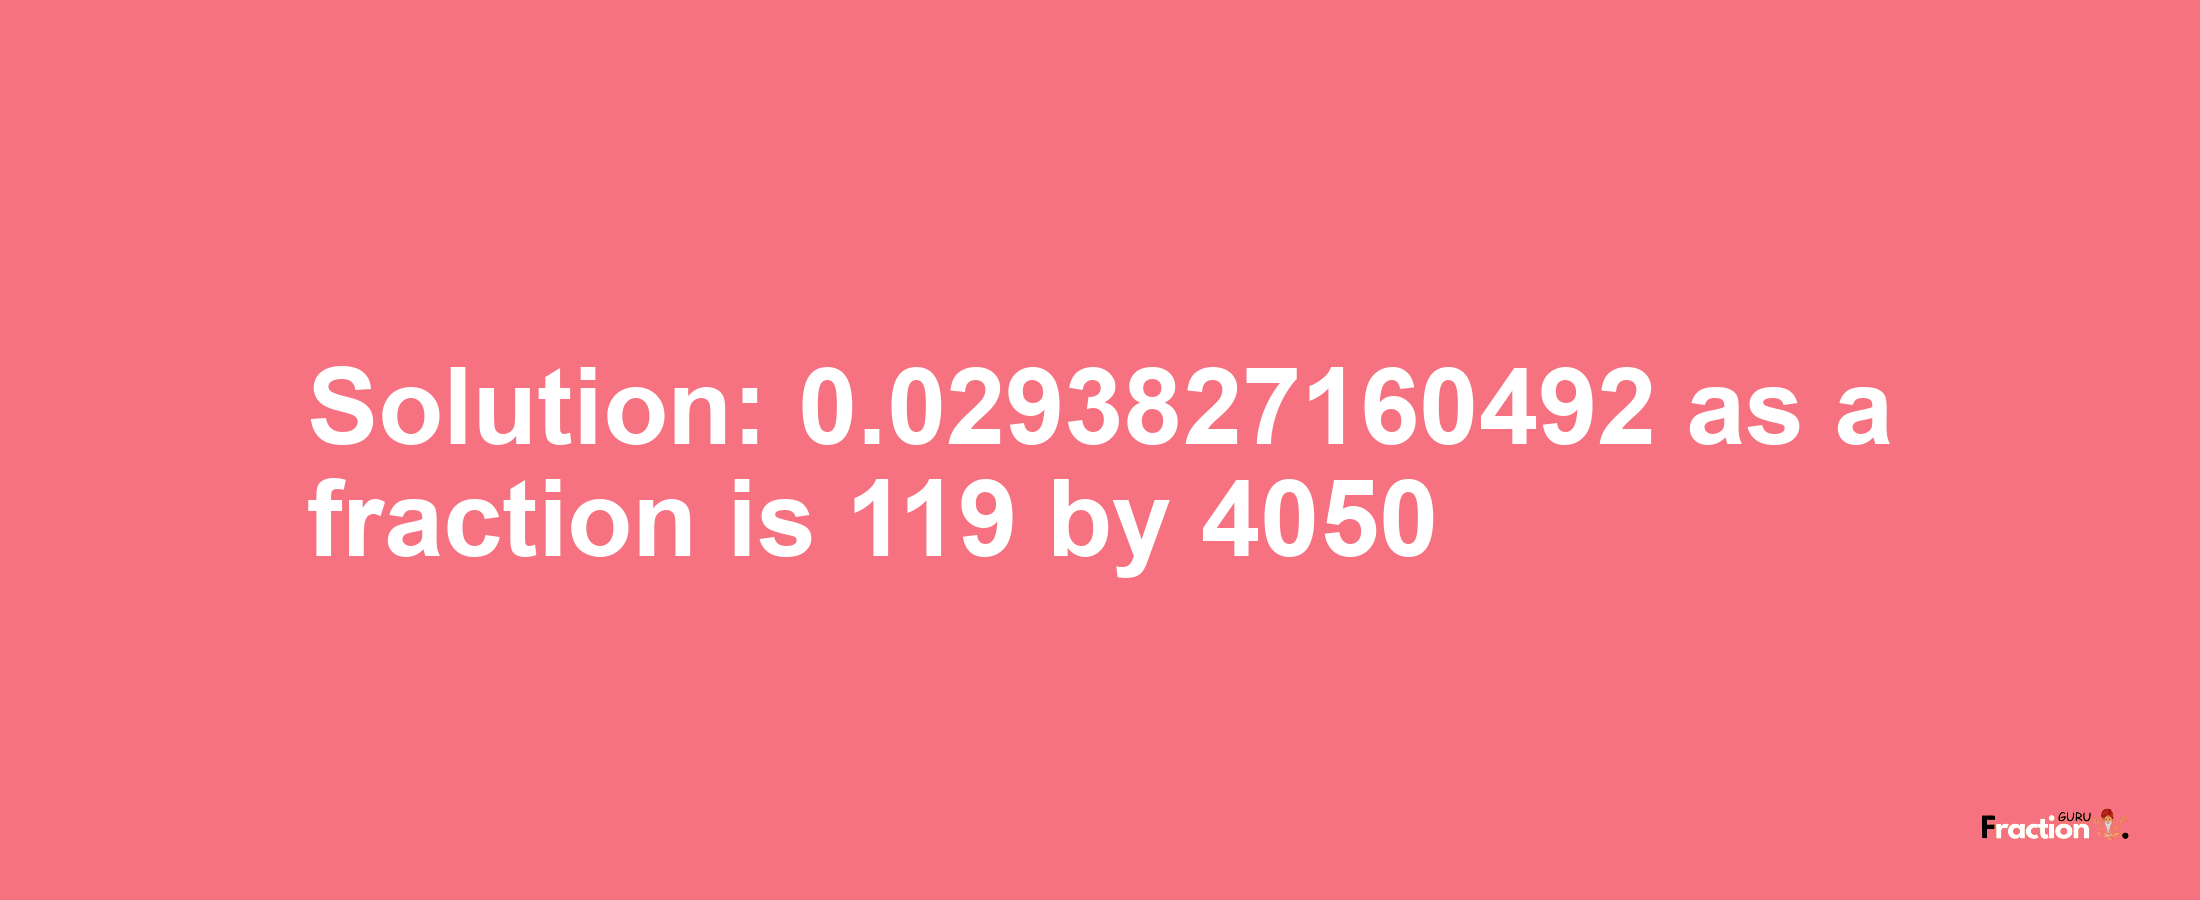 Solution:0.0293827160492 as a fraction is 119/4050